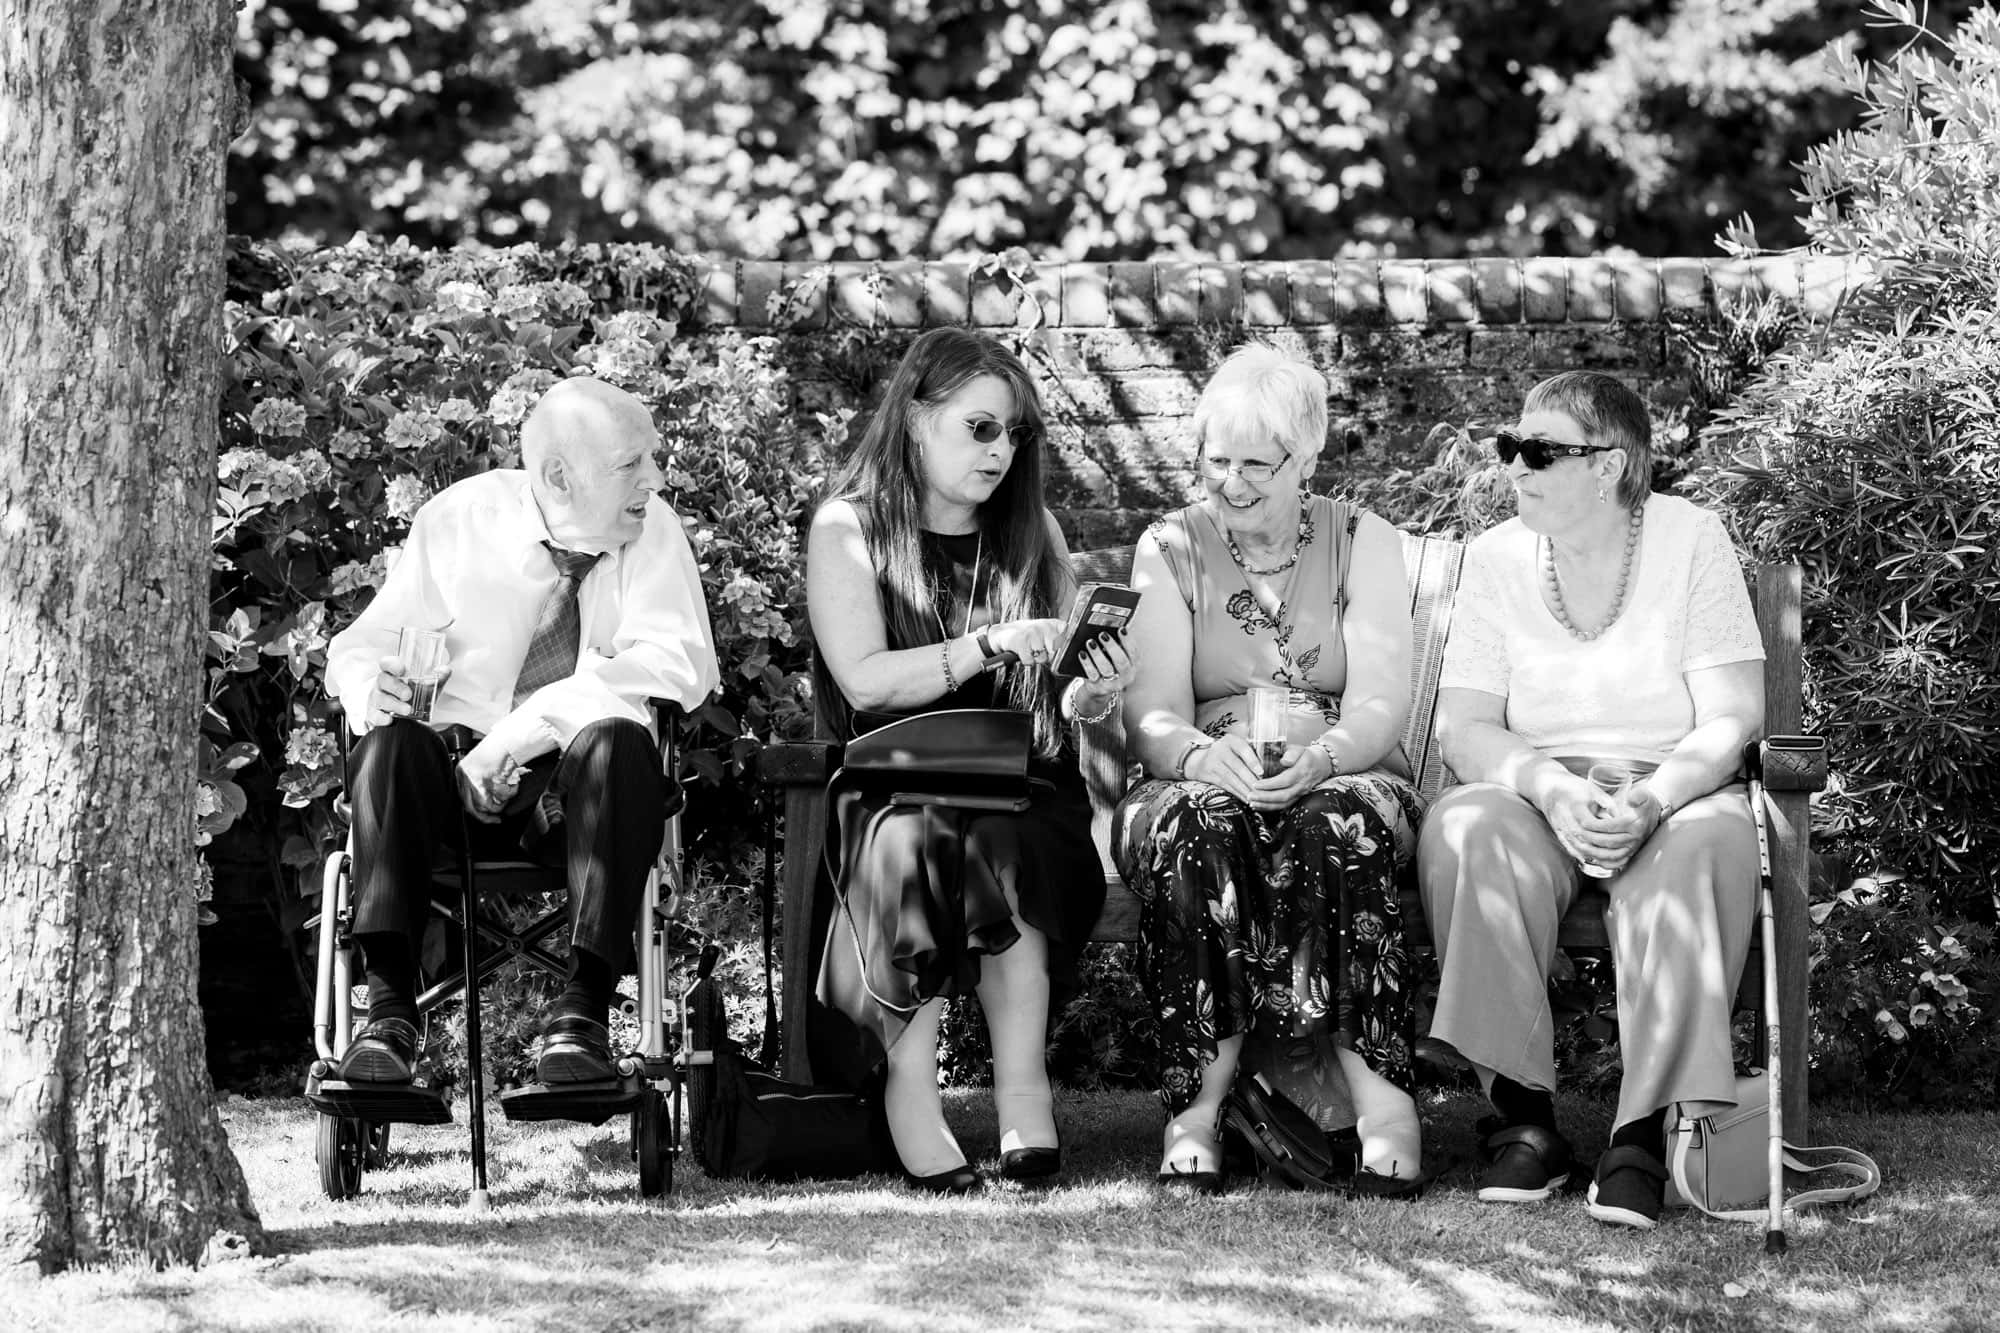 Guests chatting on bench in black and white wedding photo taken at Oaks Farm Weddings